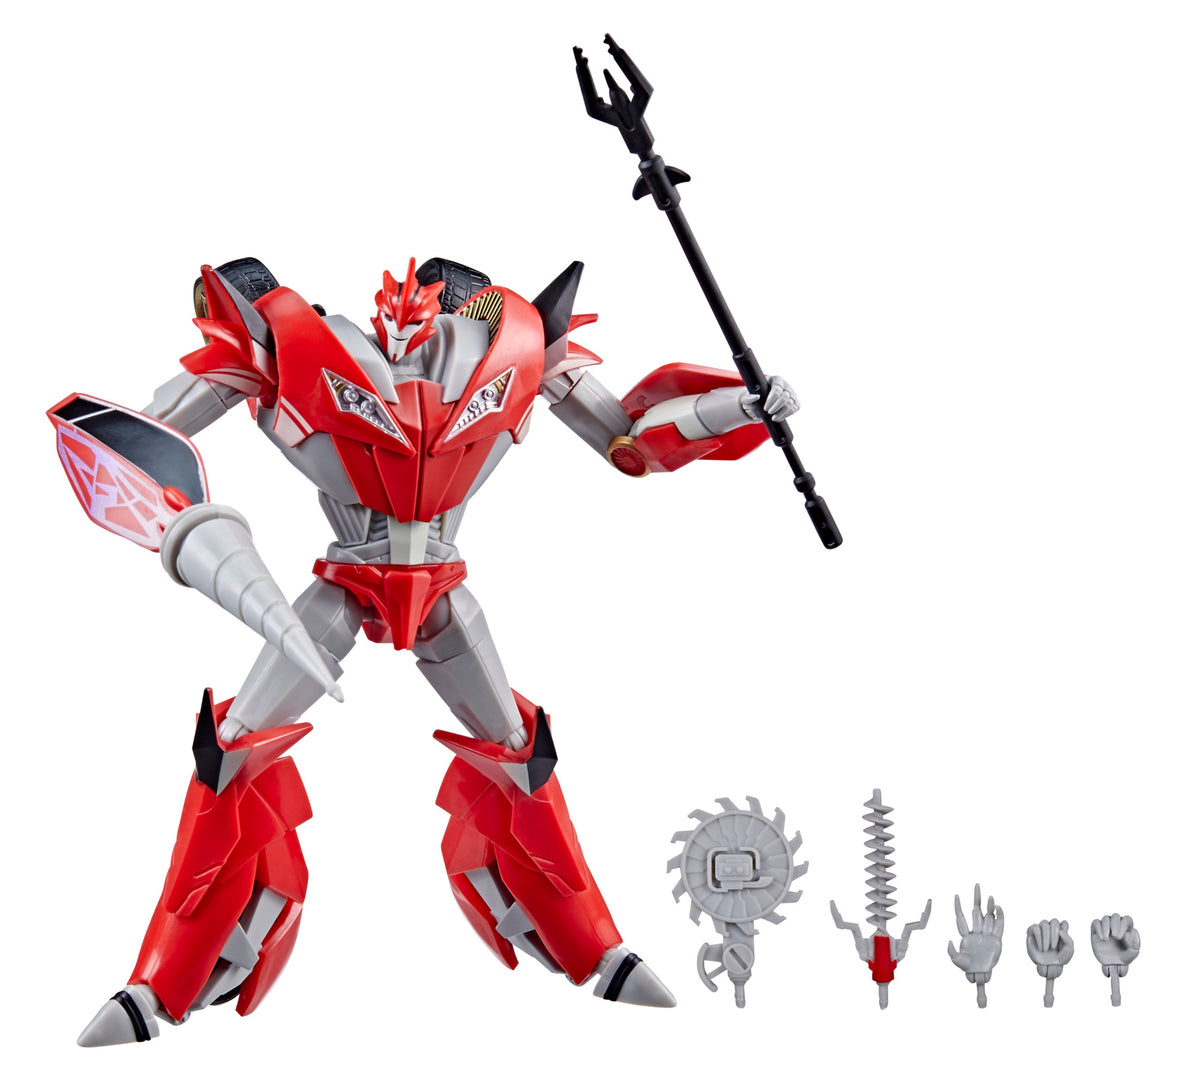 First Look at Transformers RED Ultra Magnus and Knockout